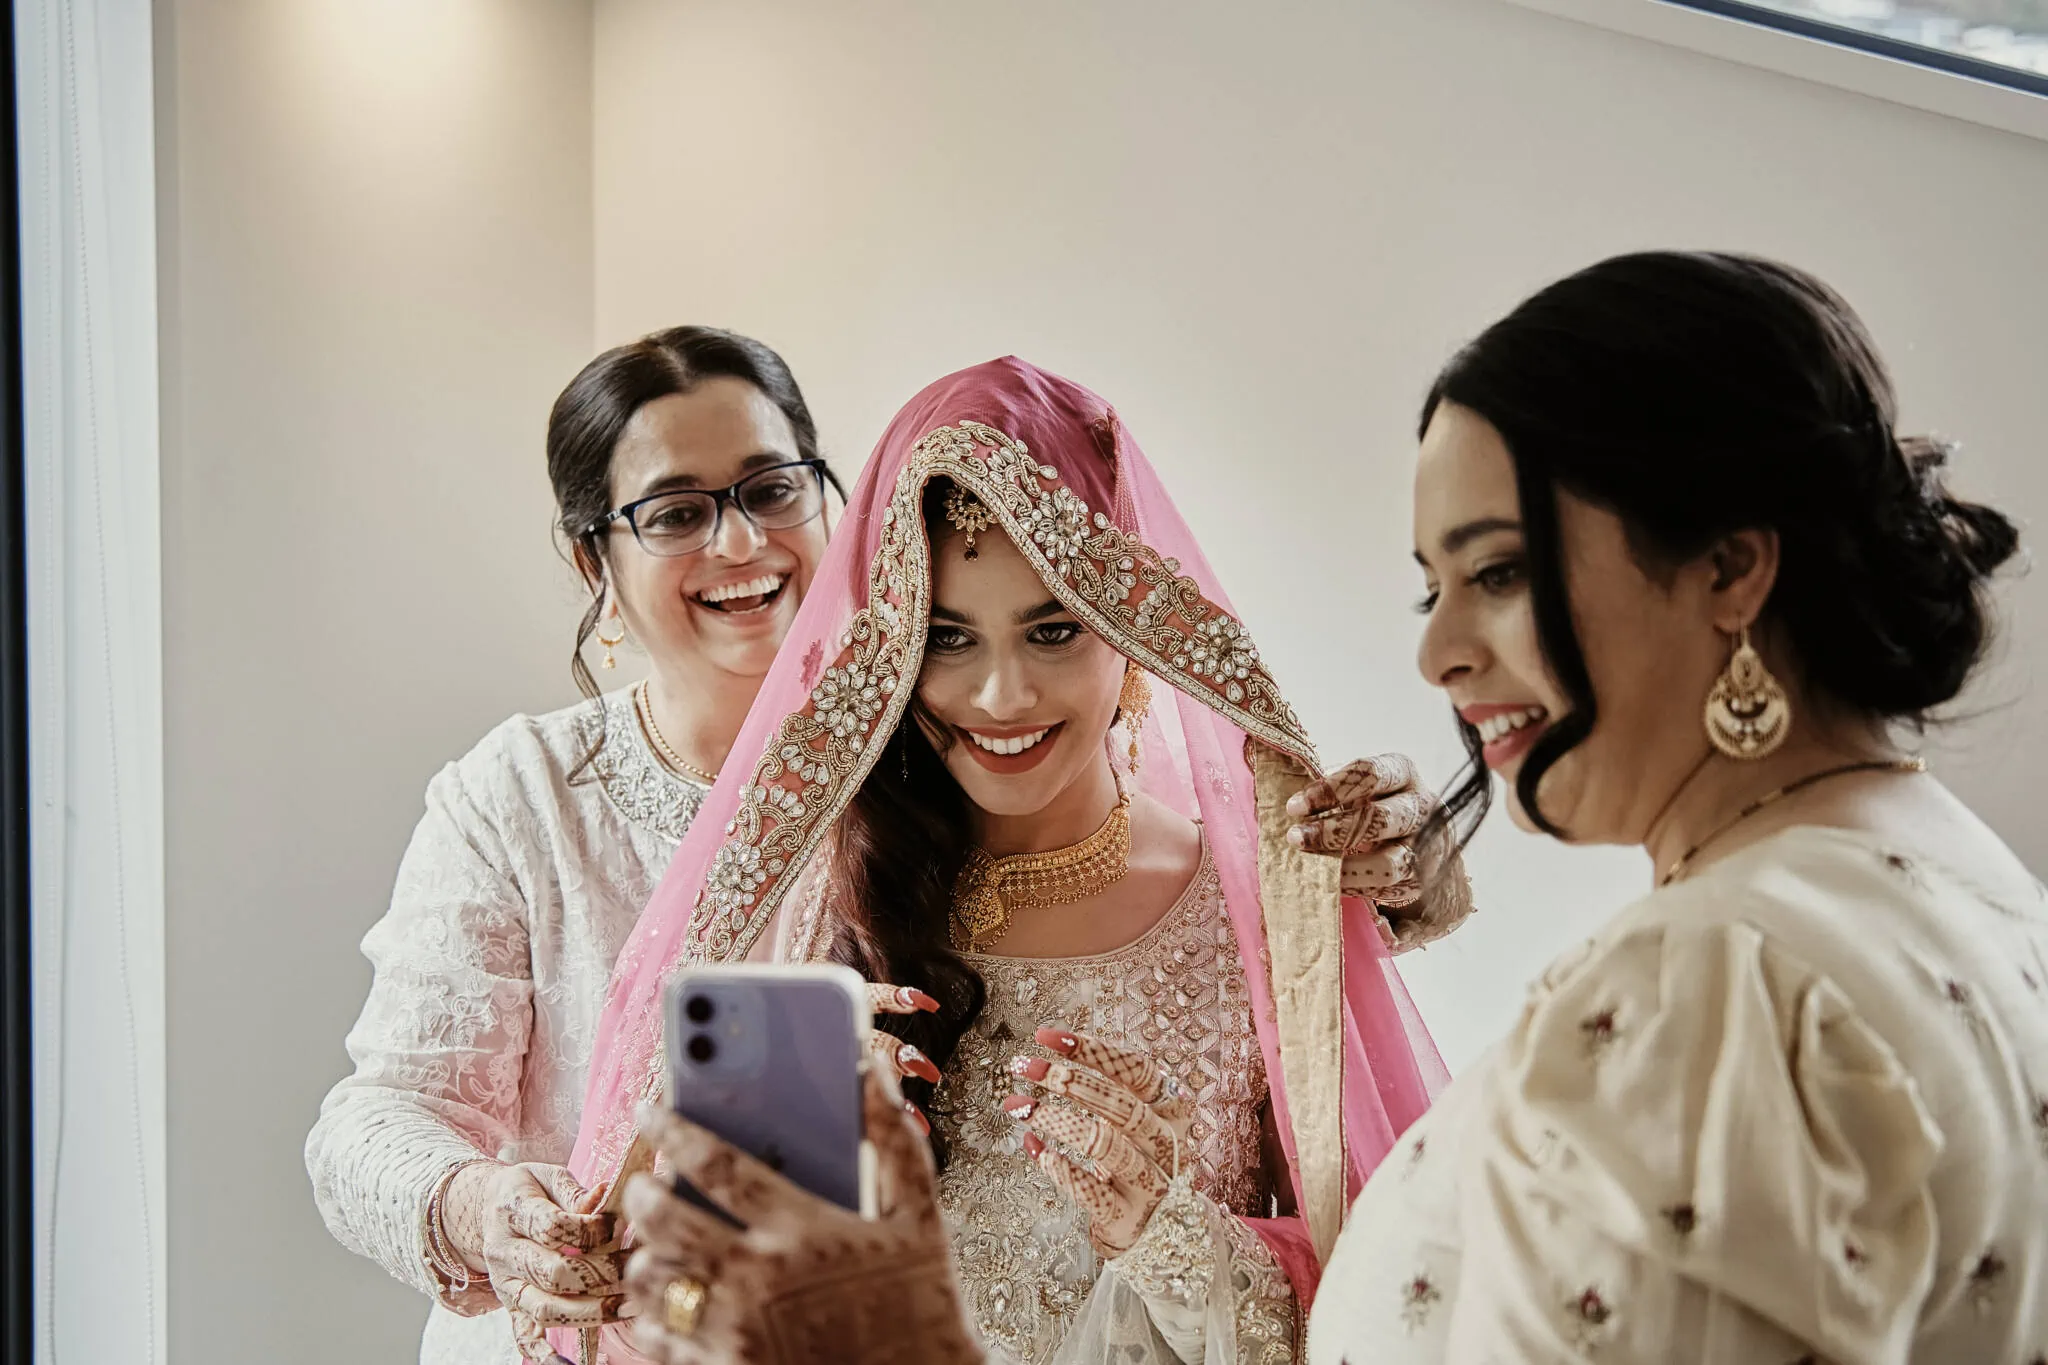 Queenstown New Zealand Elopement Wedding Photographer - Wasim and Yumn's Queenstown Islamic Wedding - A bride and bridesmaids are taking a selfie in front of a mirror.